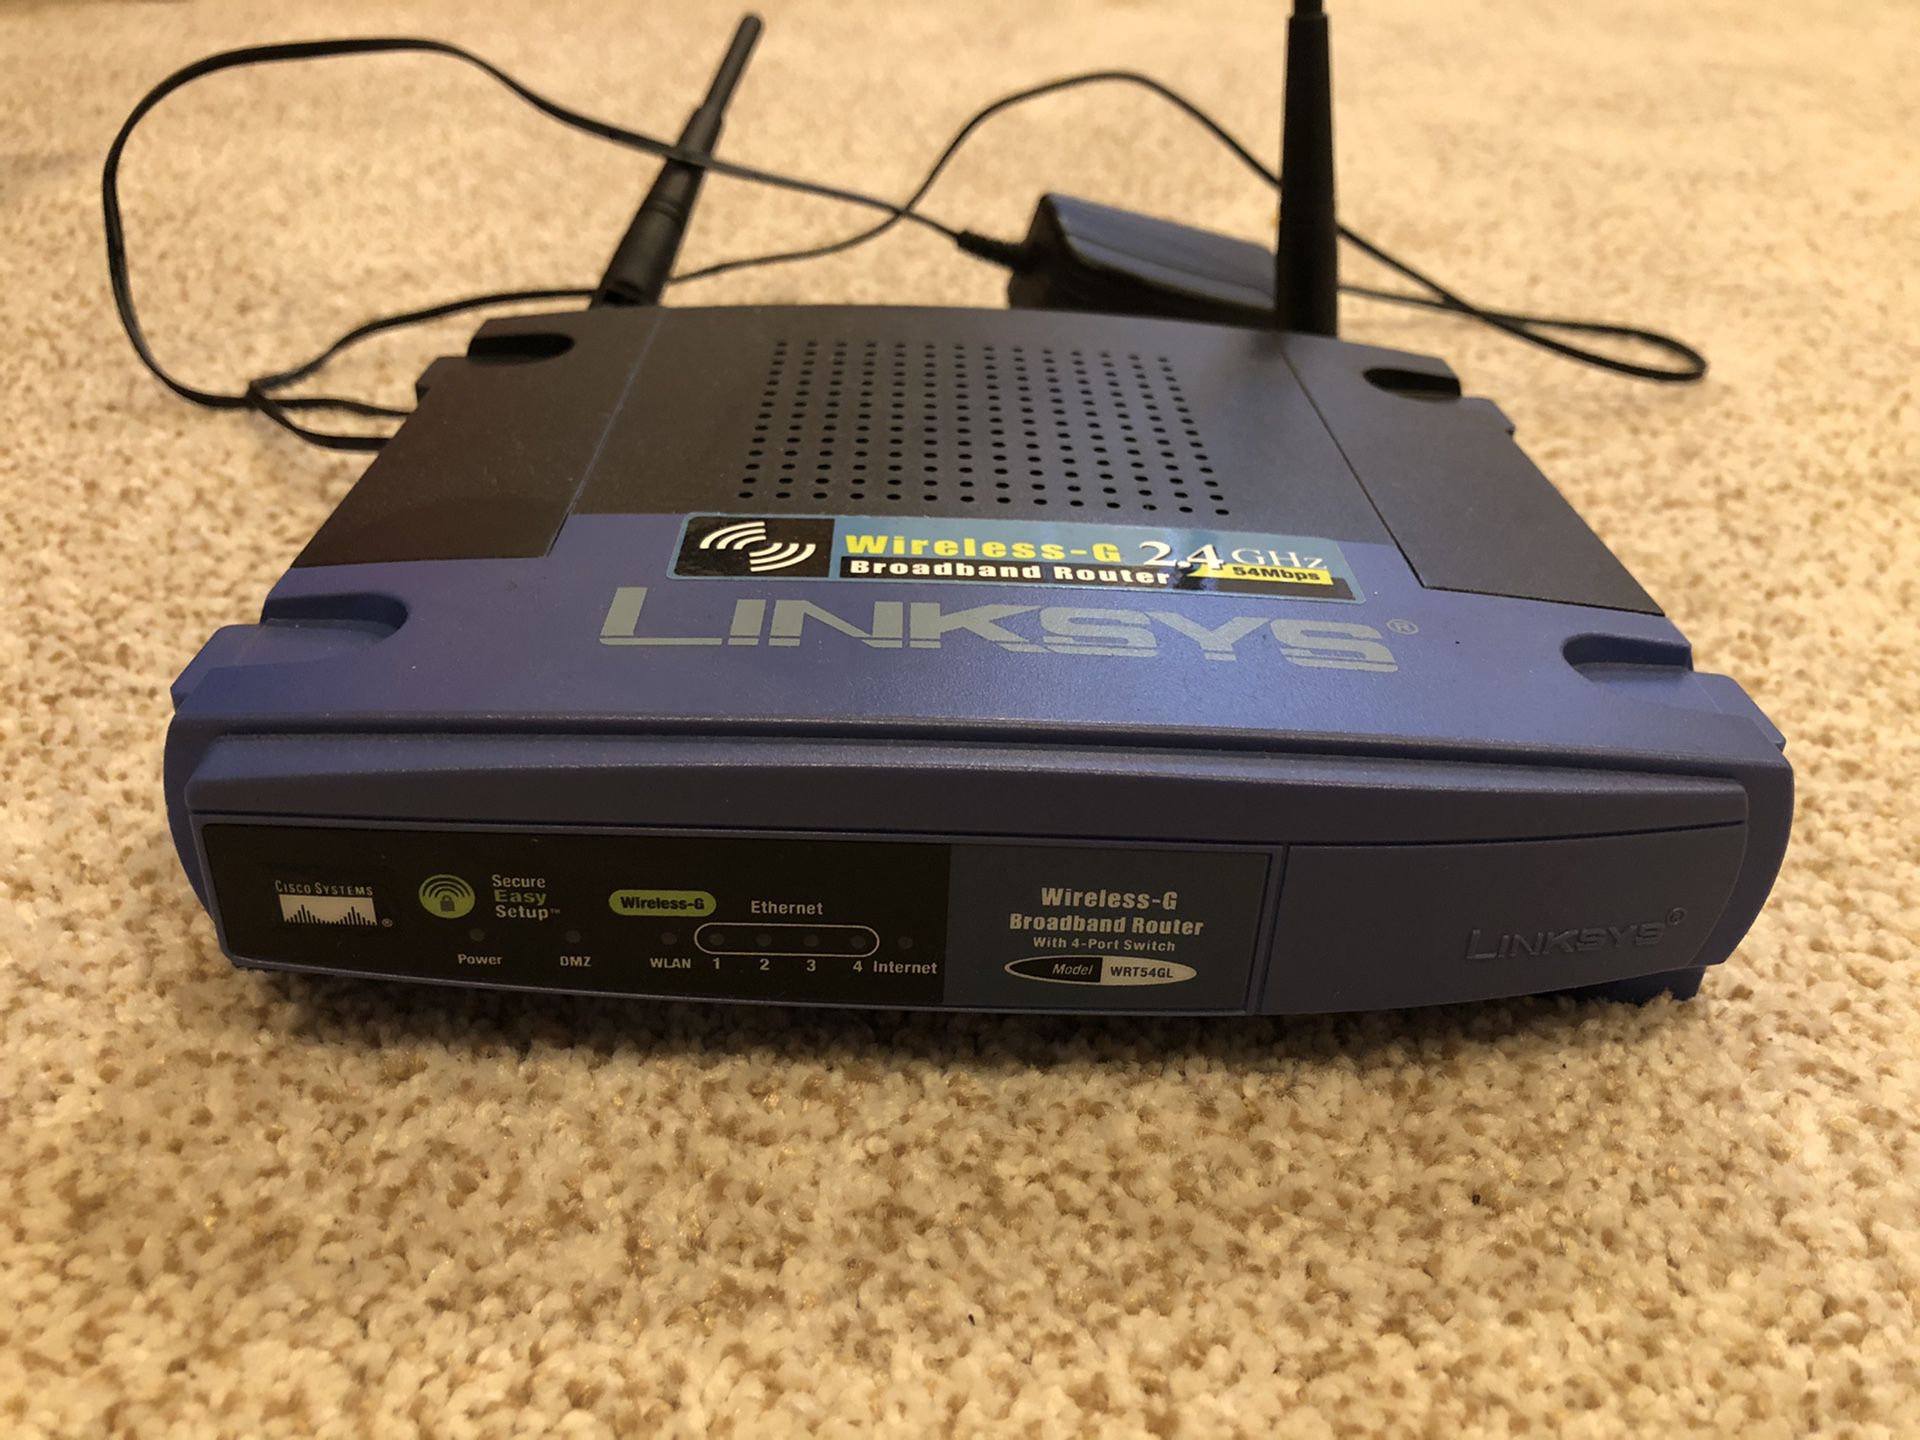 Free Linksys wireless-g router